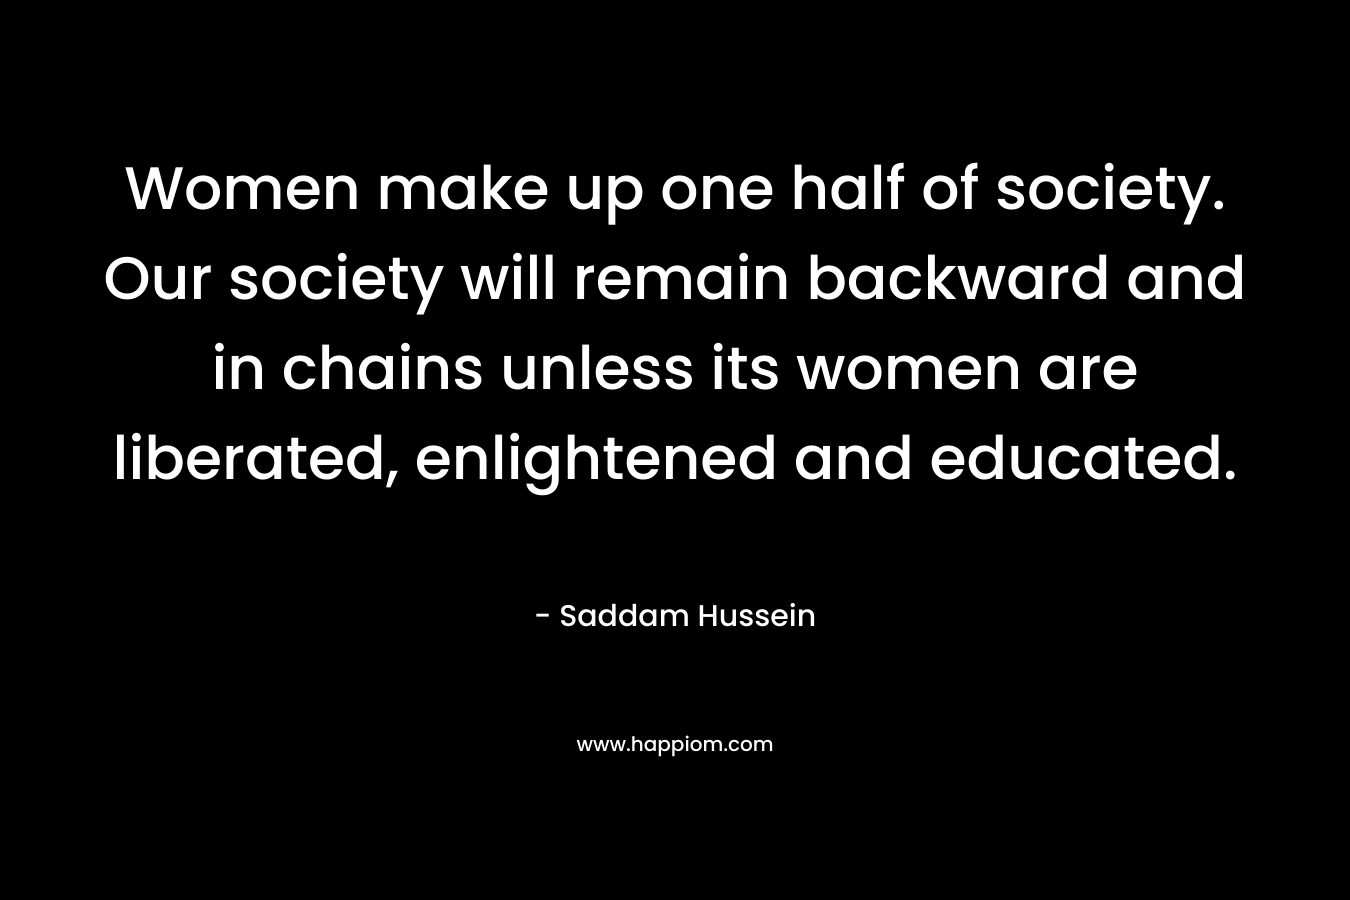 Women make up one half of society. Our society will remain backward and in chains unless its women are liberated, enlightened and educated. – Saddam Hussein